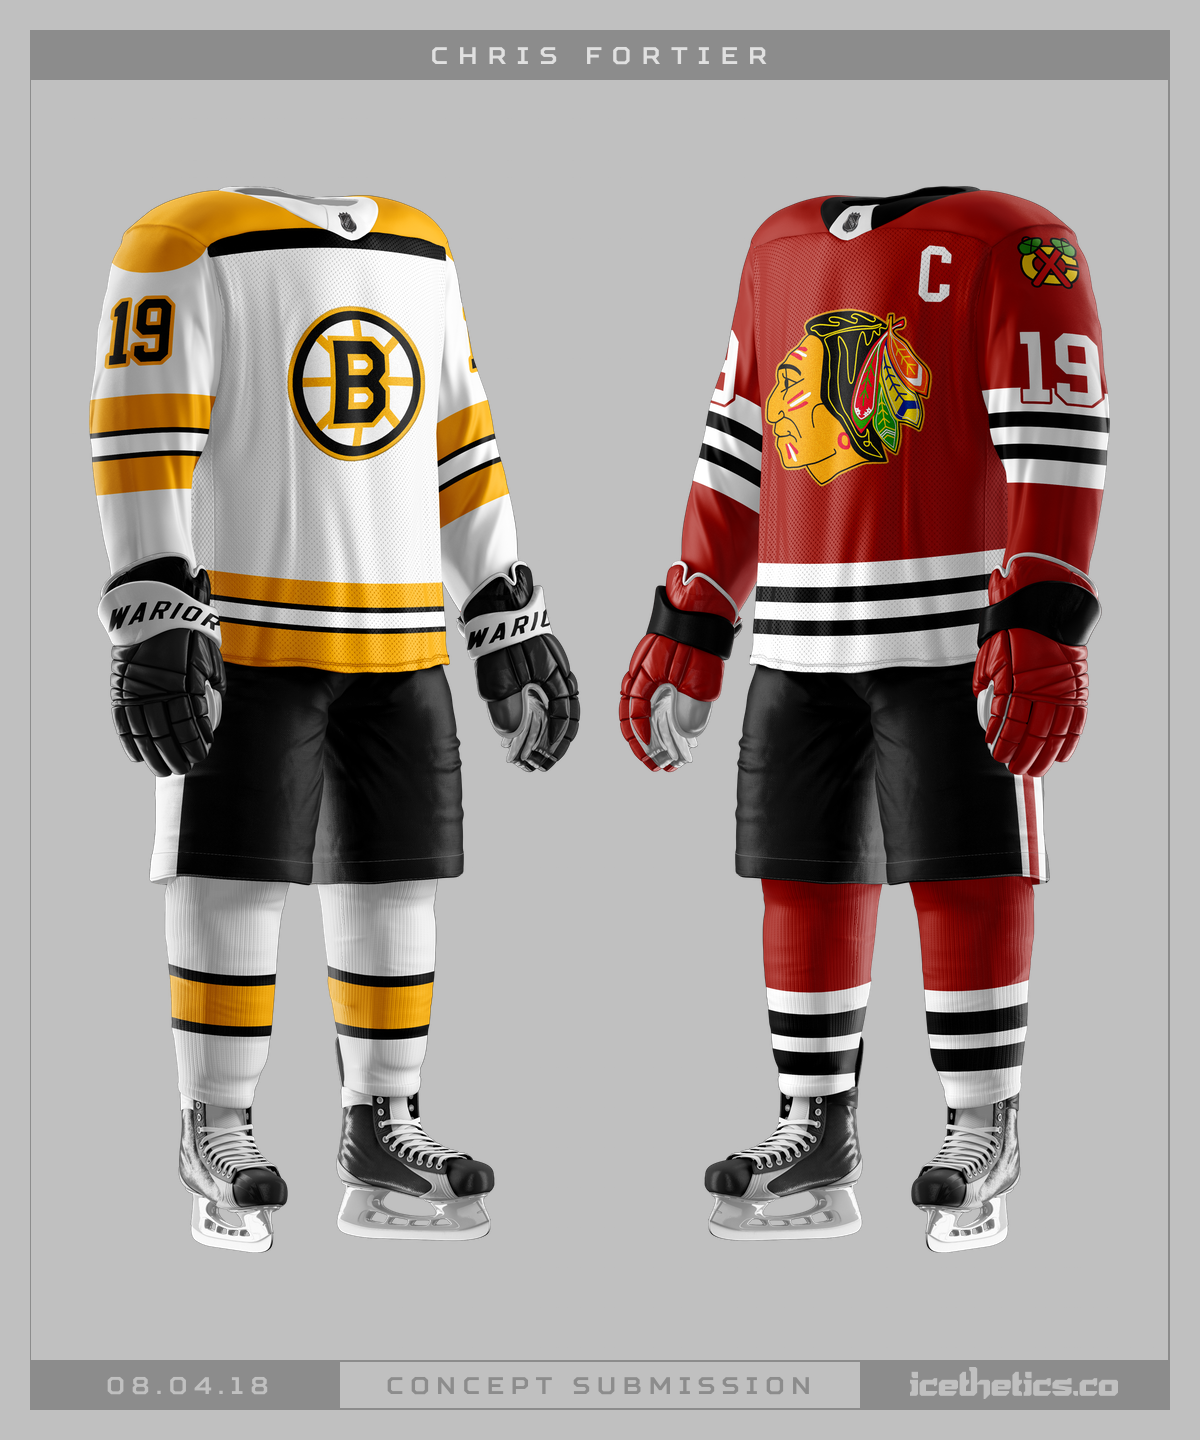 NHL Heritage Hockey Weekend (Jersey Concepts)